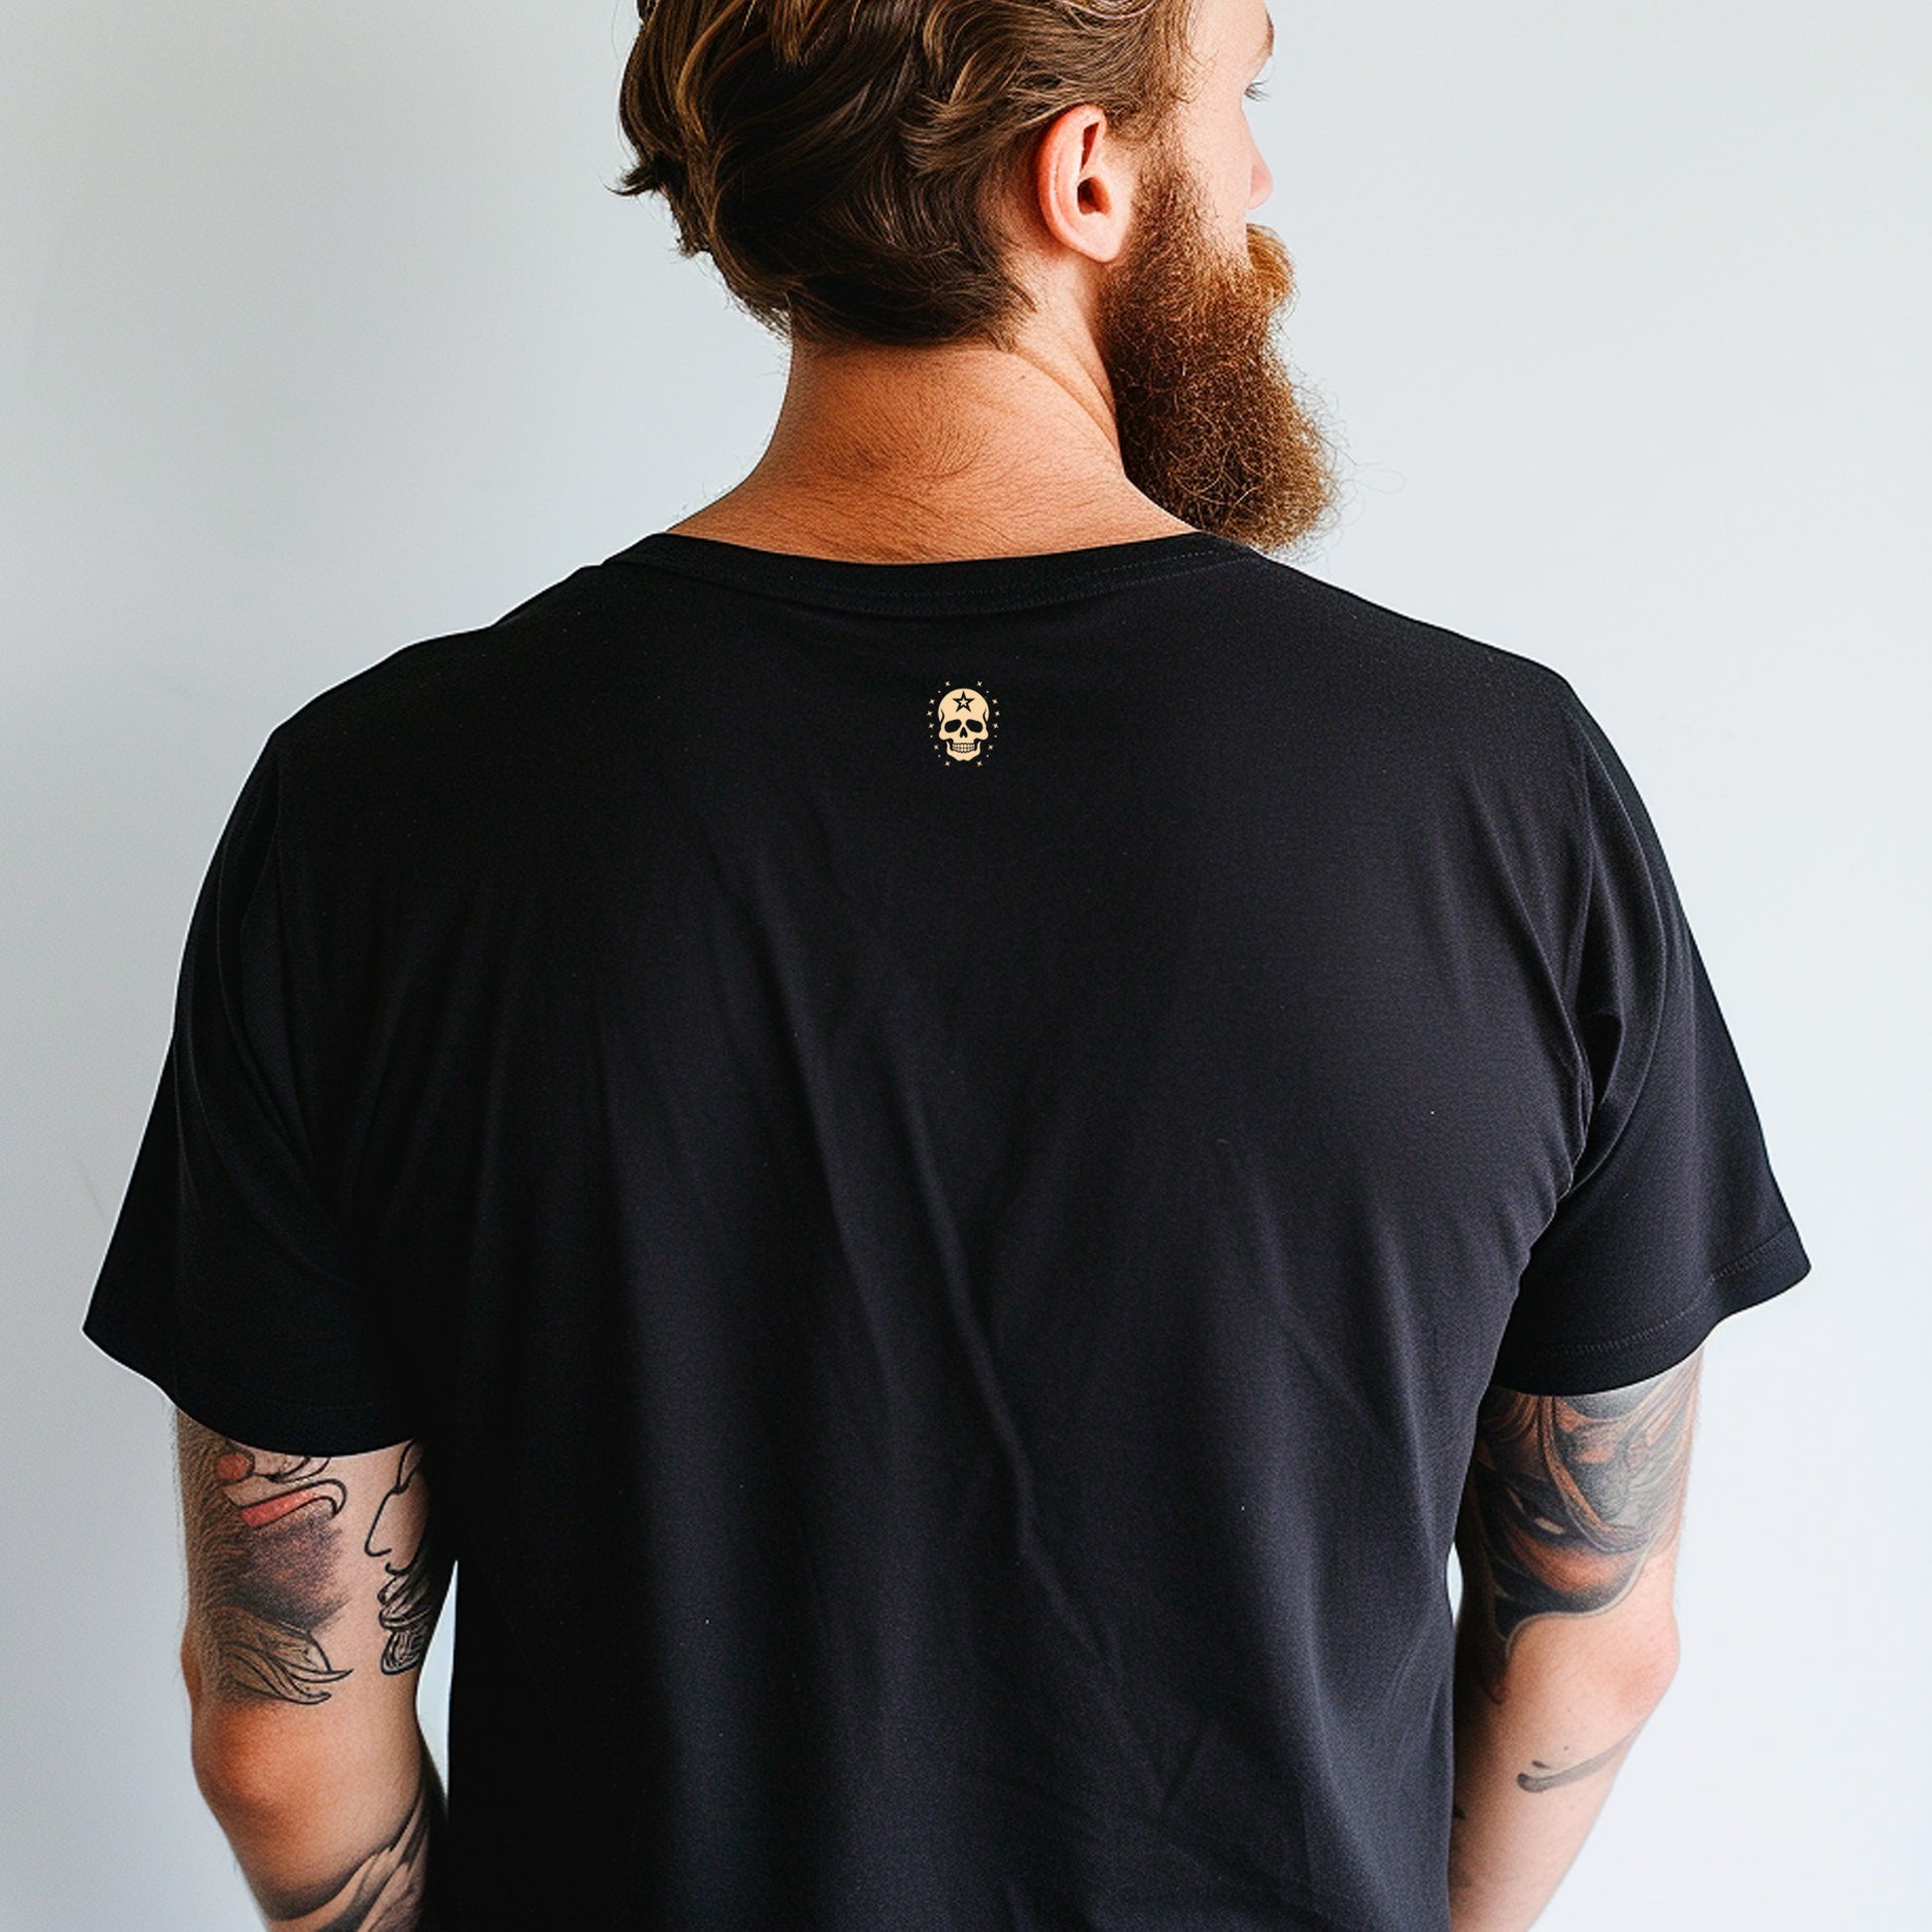 back view of model wearing black Anchor's Tale Unisex t-shirt